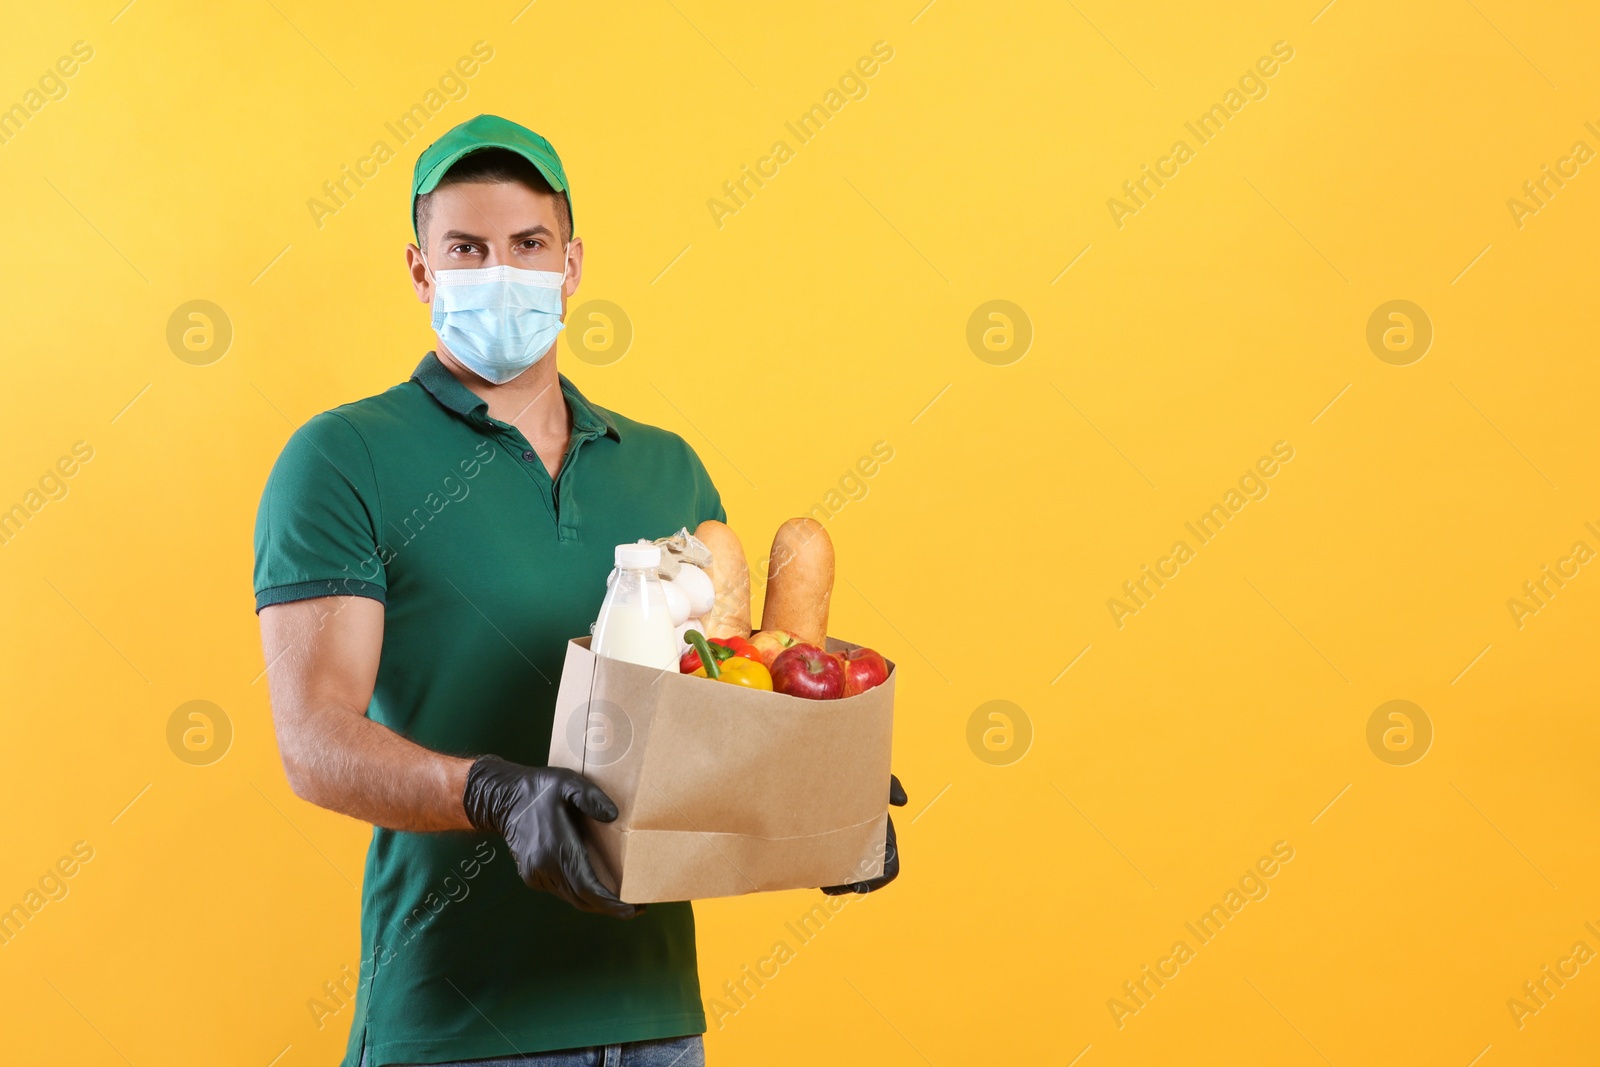 Photo of Courier in medical mask holding paper bag with food on yellow background, space for text. Delivery service during quarantine due to Covid-19 outbreak